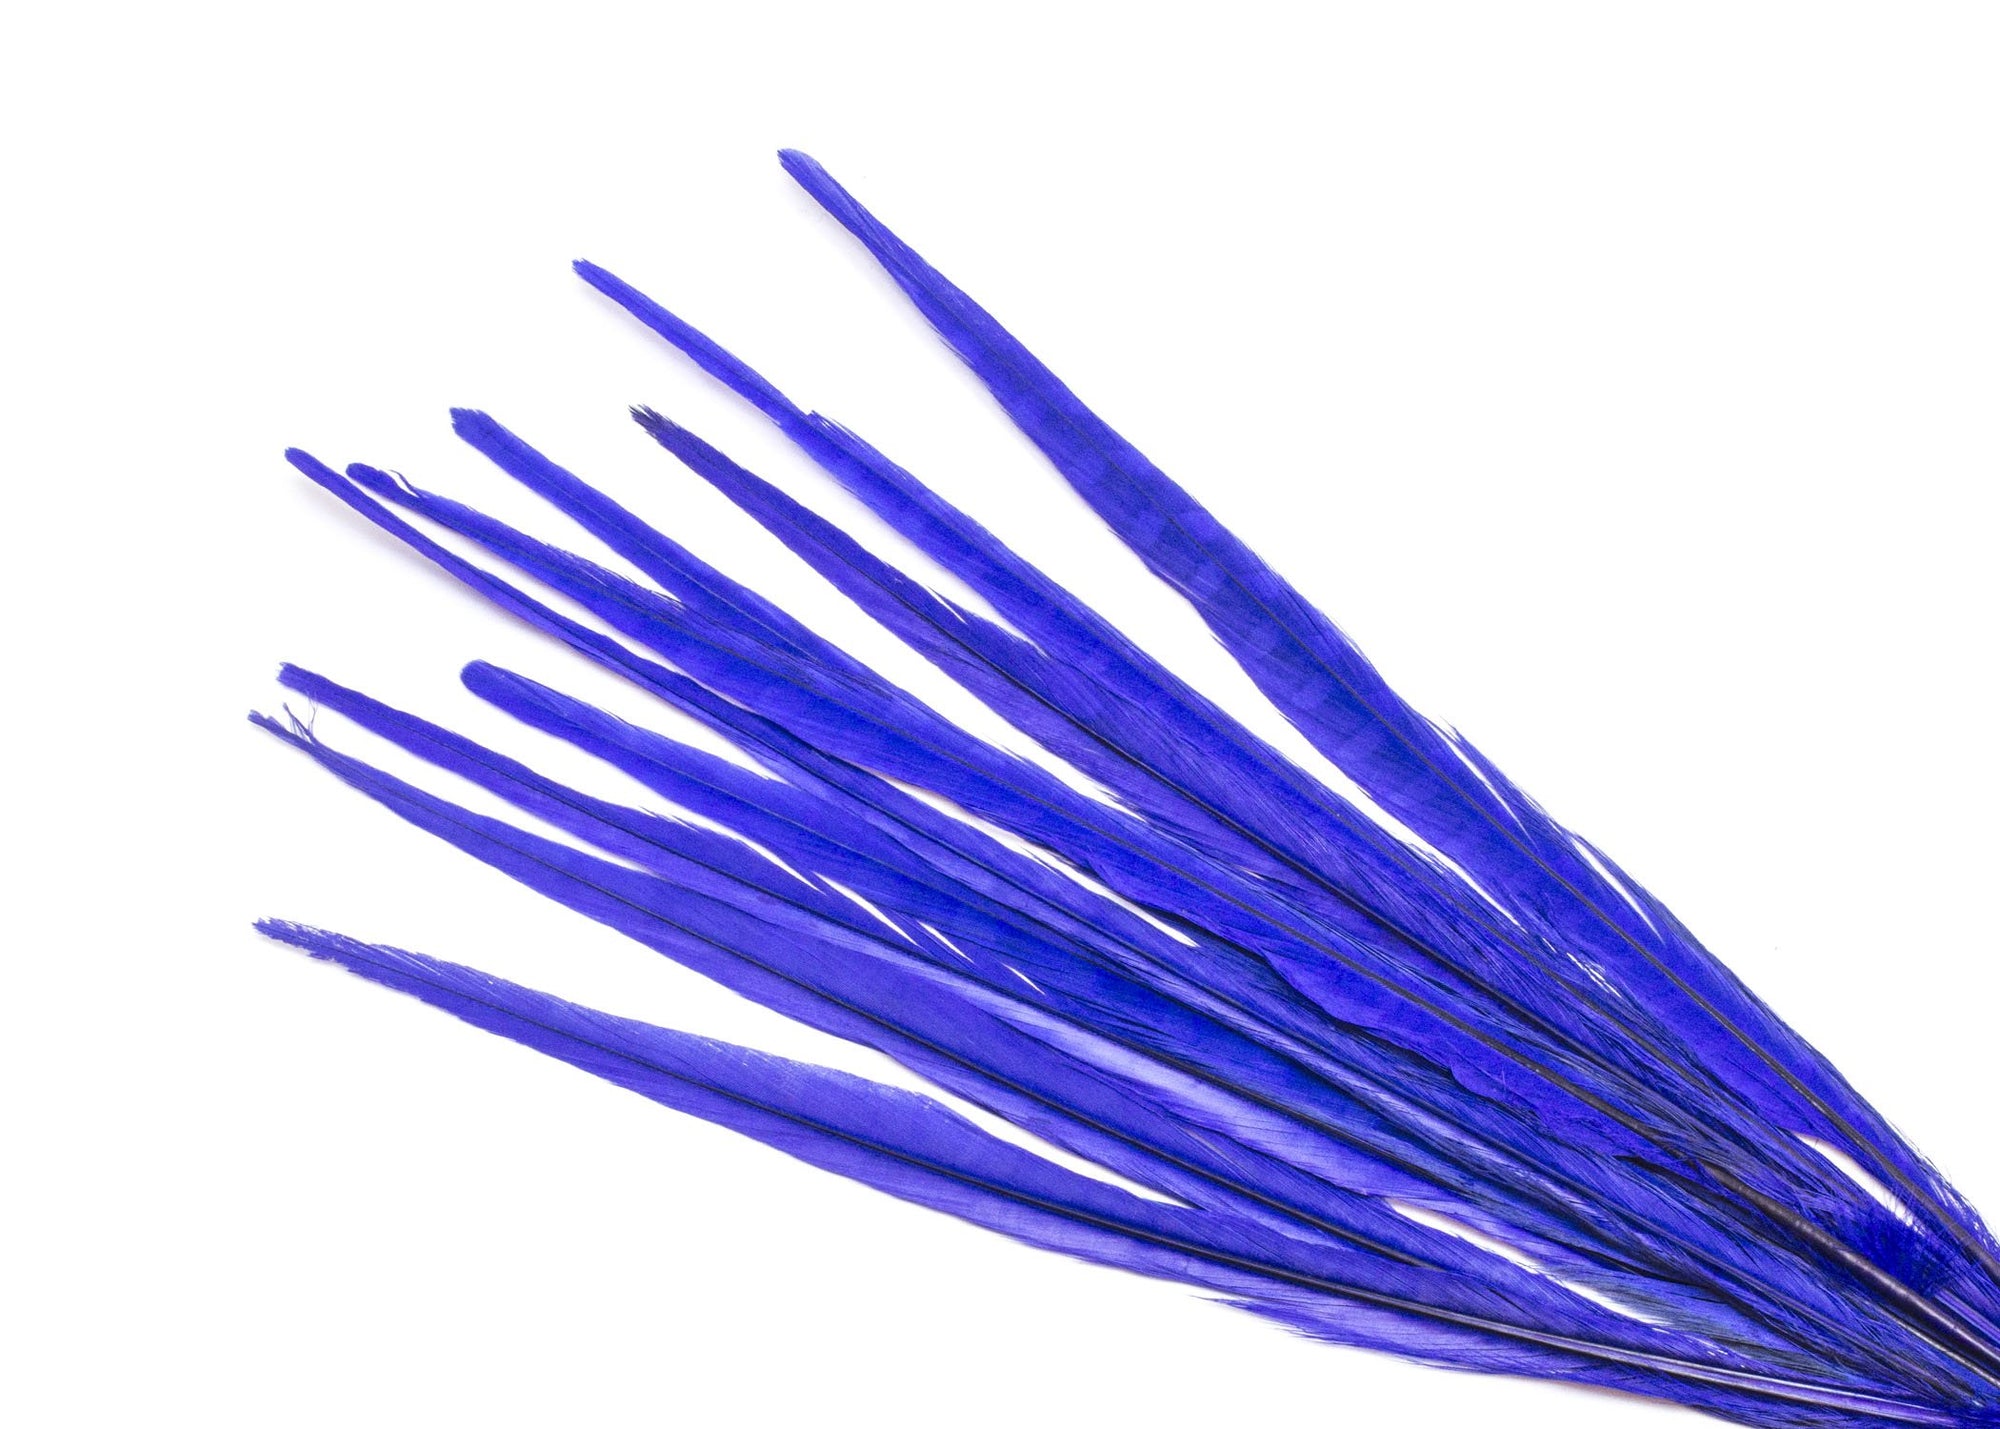 Ostrich Feathers - 16-18 Tail Feathers - Purple